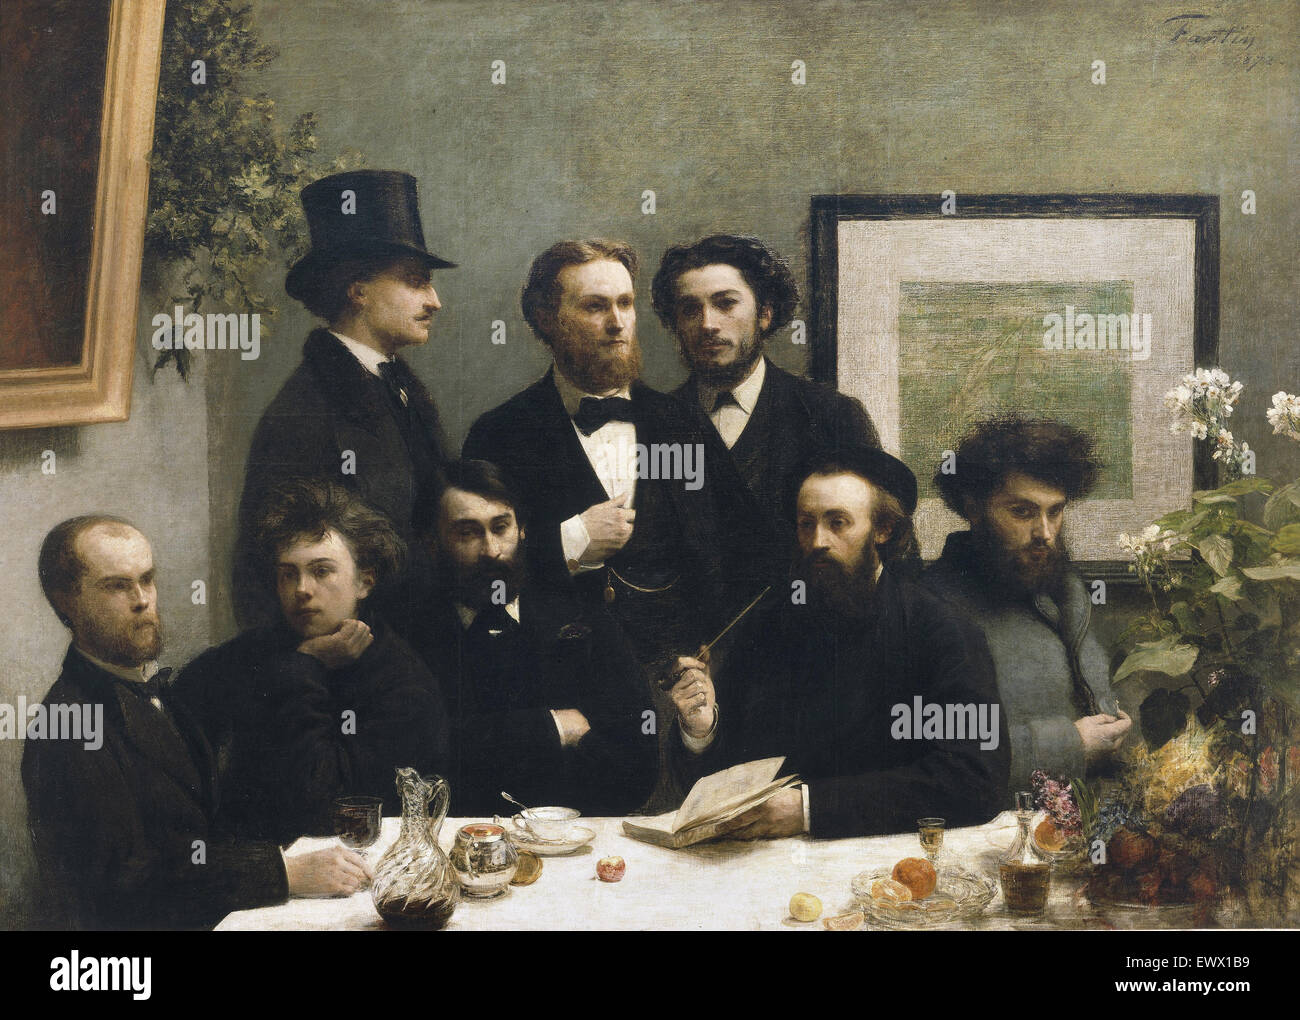 Henri Fantin-Latour, By the Table 1872 Oil on canvas. Musee d'Orsay, Paris, France. Stock Photo